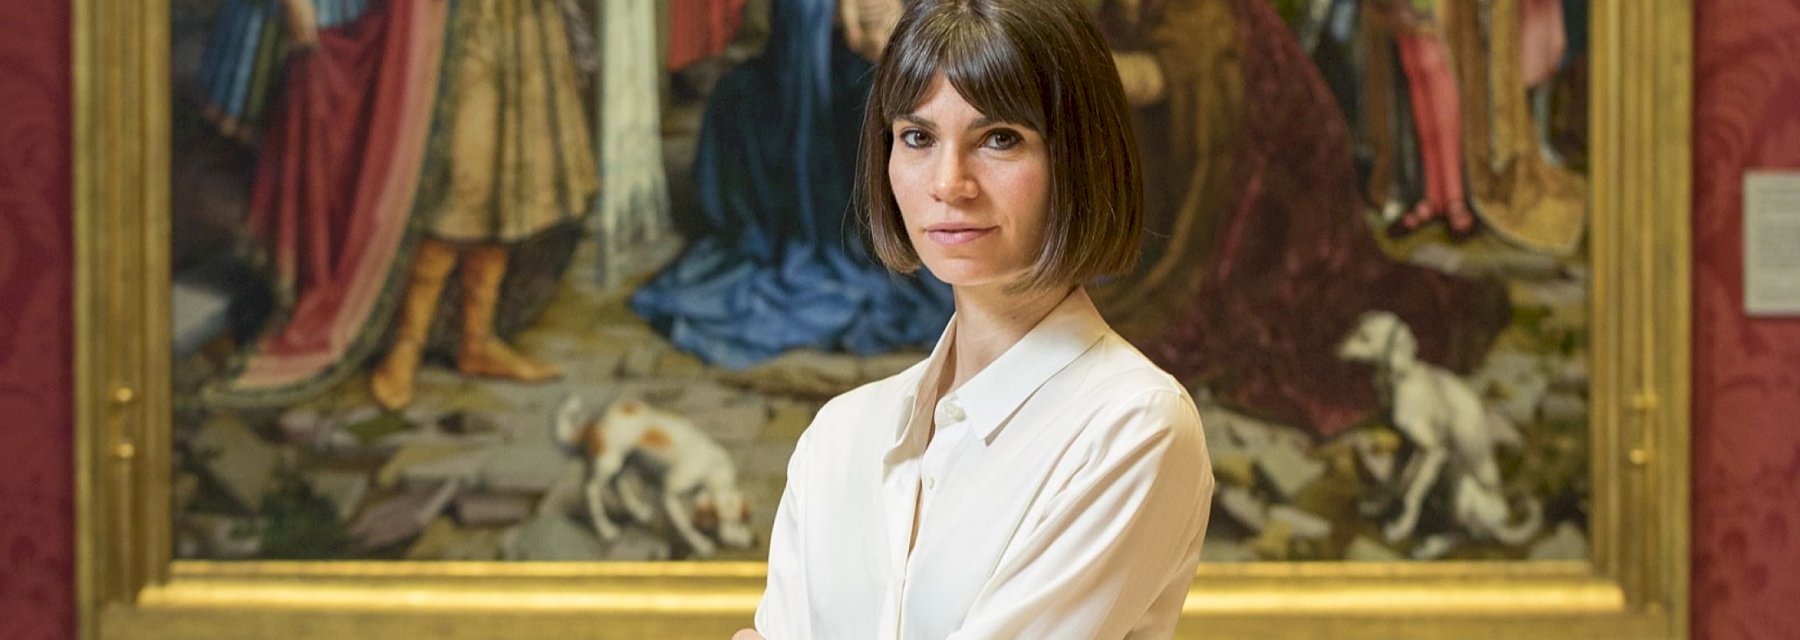 Emma Capron, curator at London’s National Gallery, on ‘The Ugly Duchess’